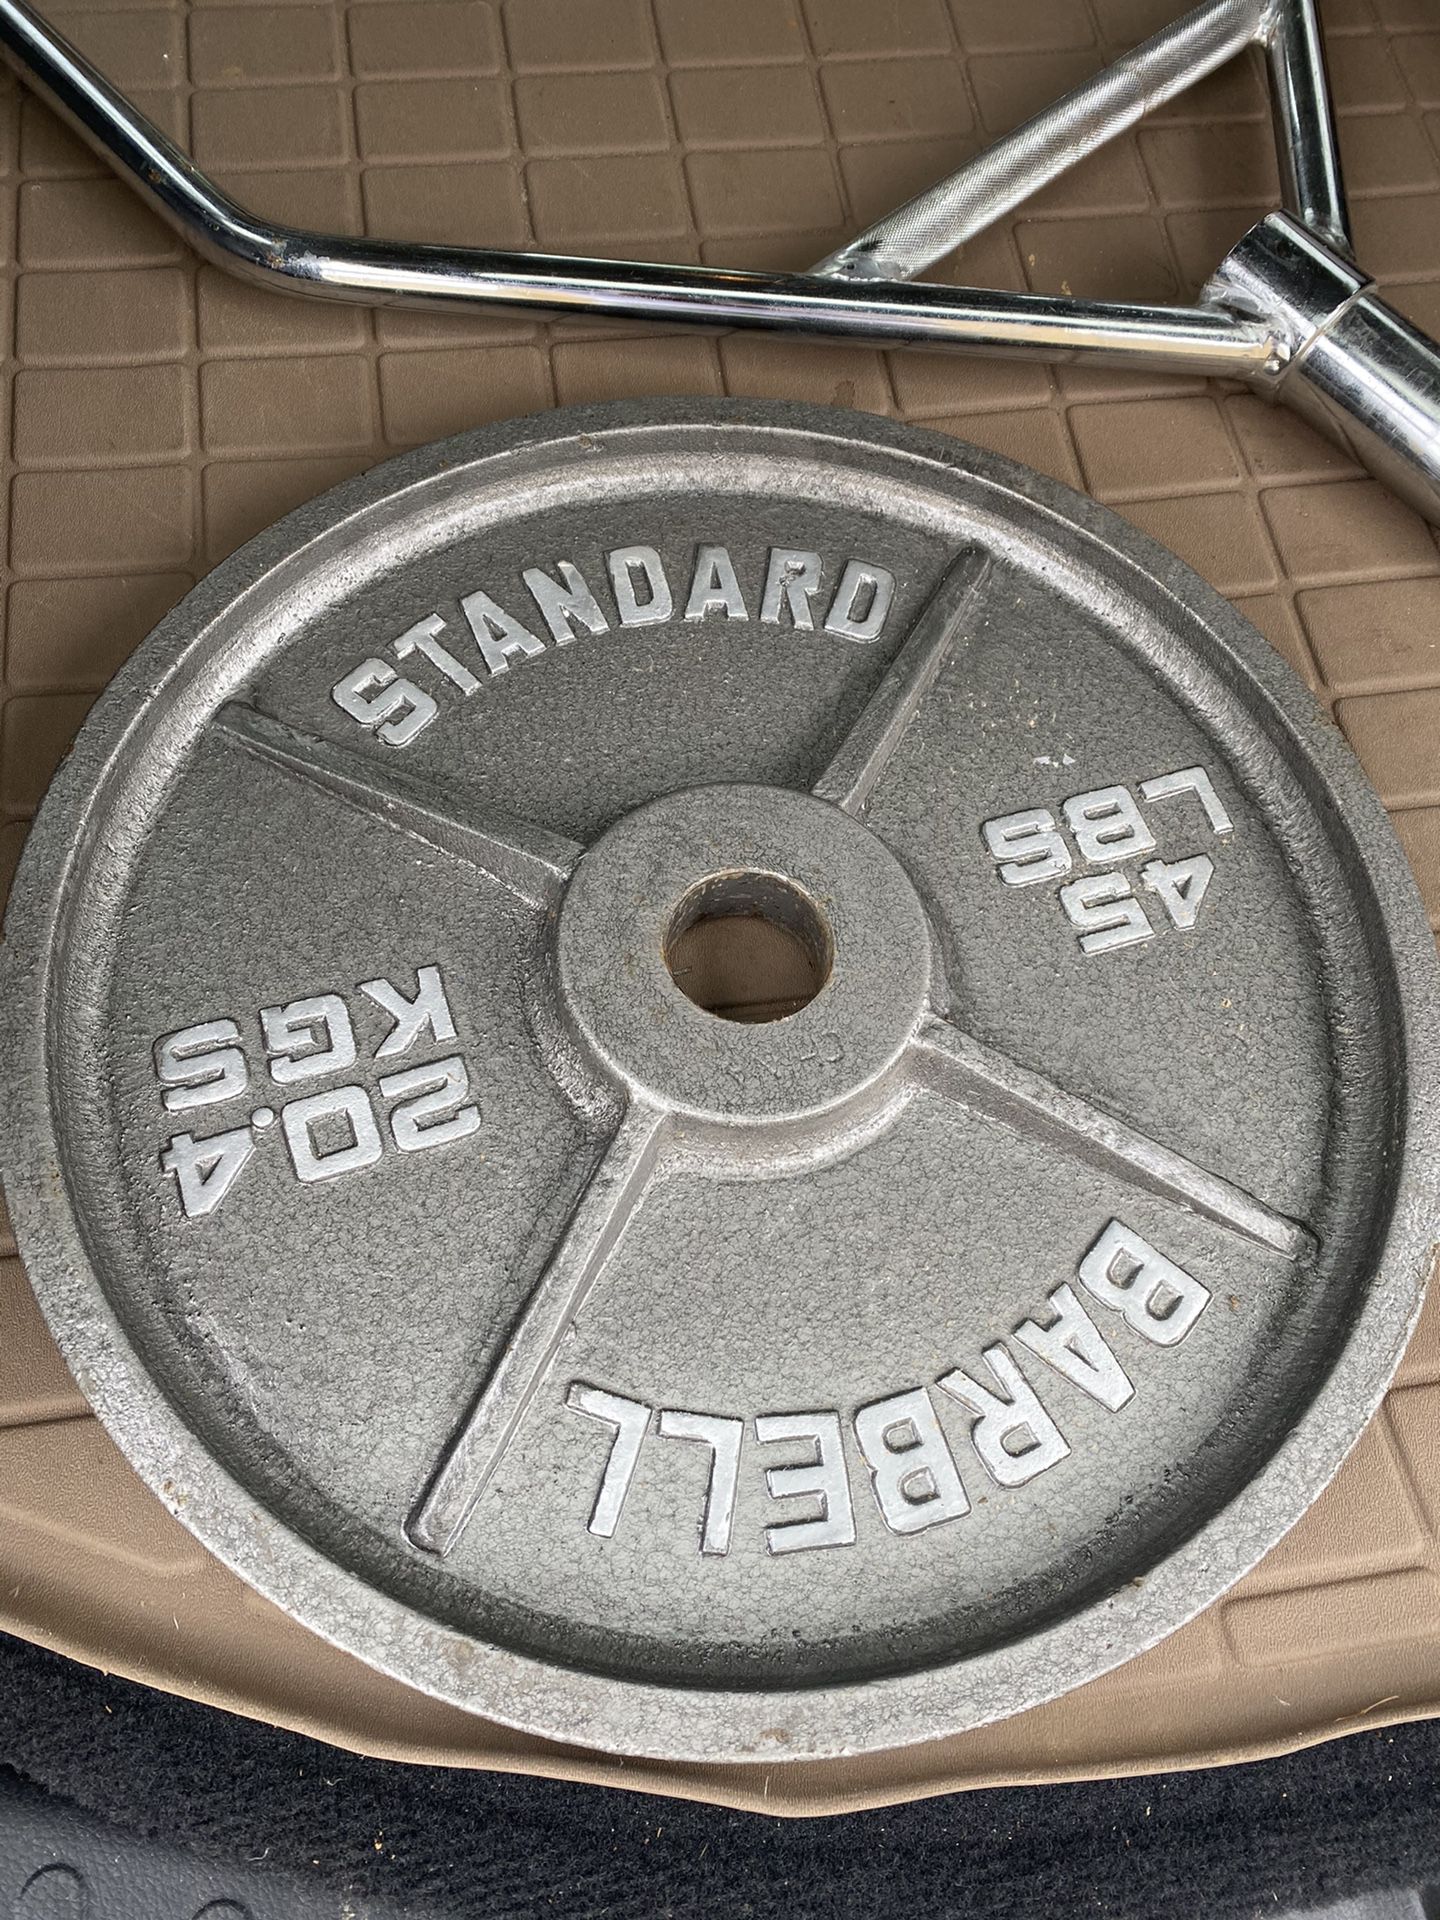 45 lb plate (1 plate)